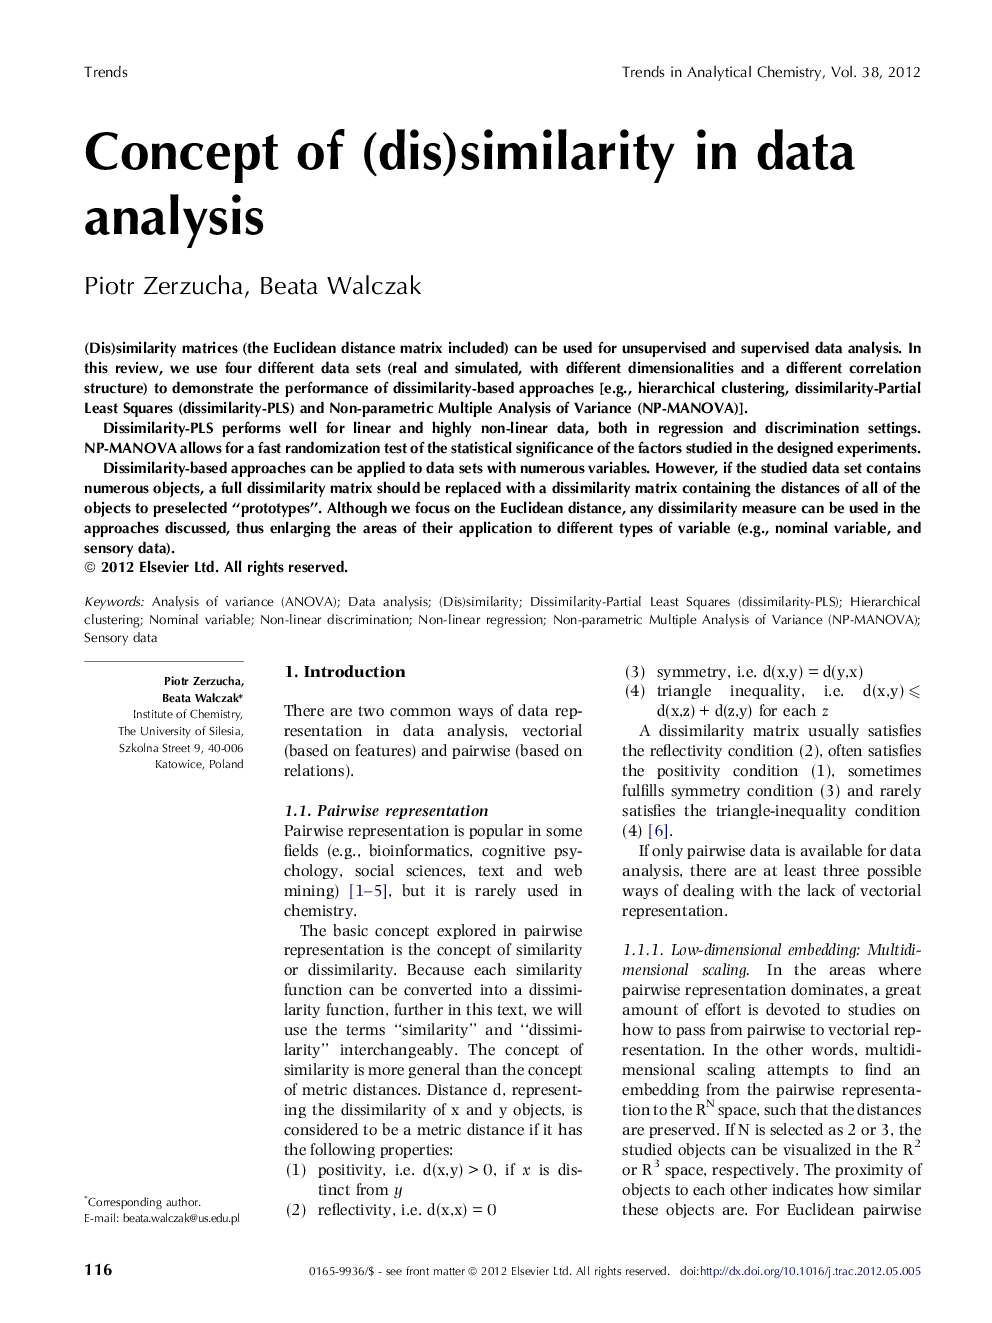 Concept of (dis)similarity in data analysis